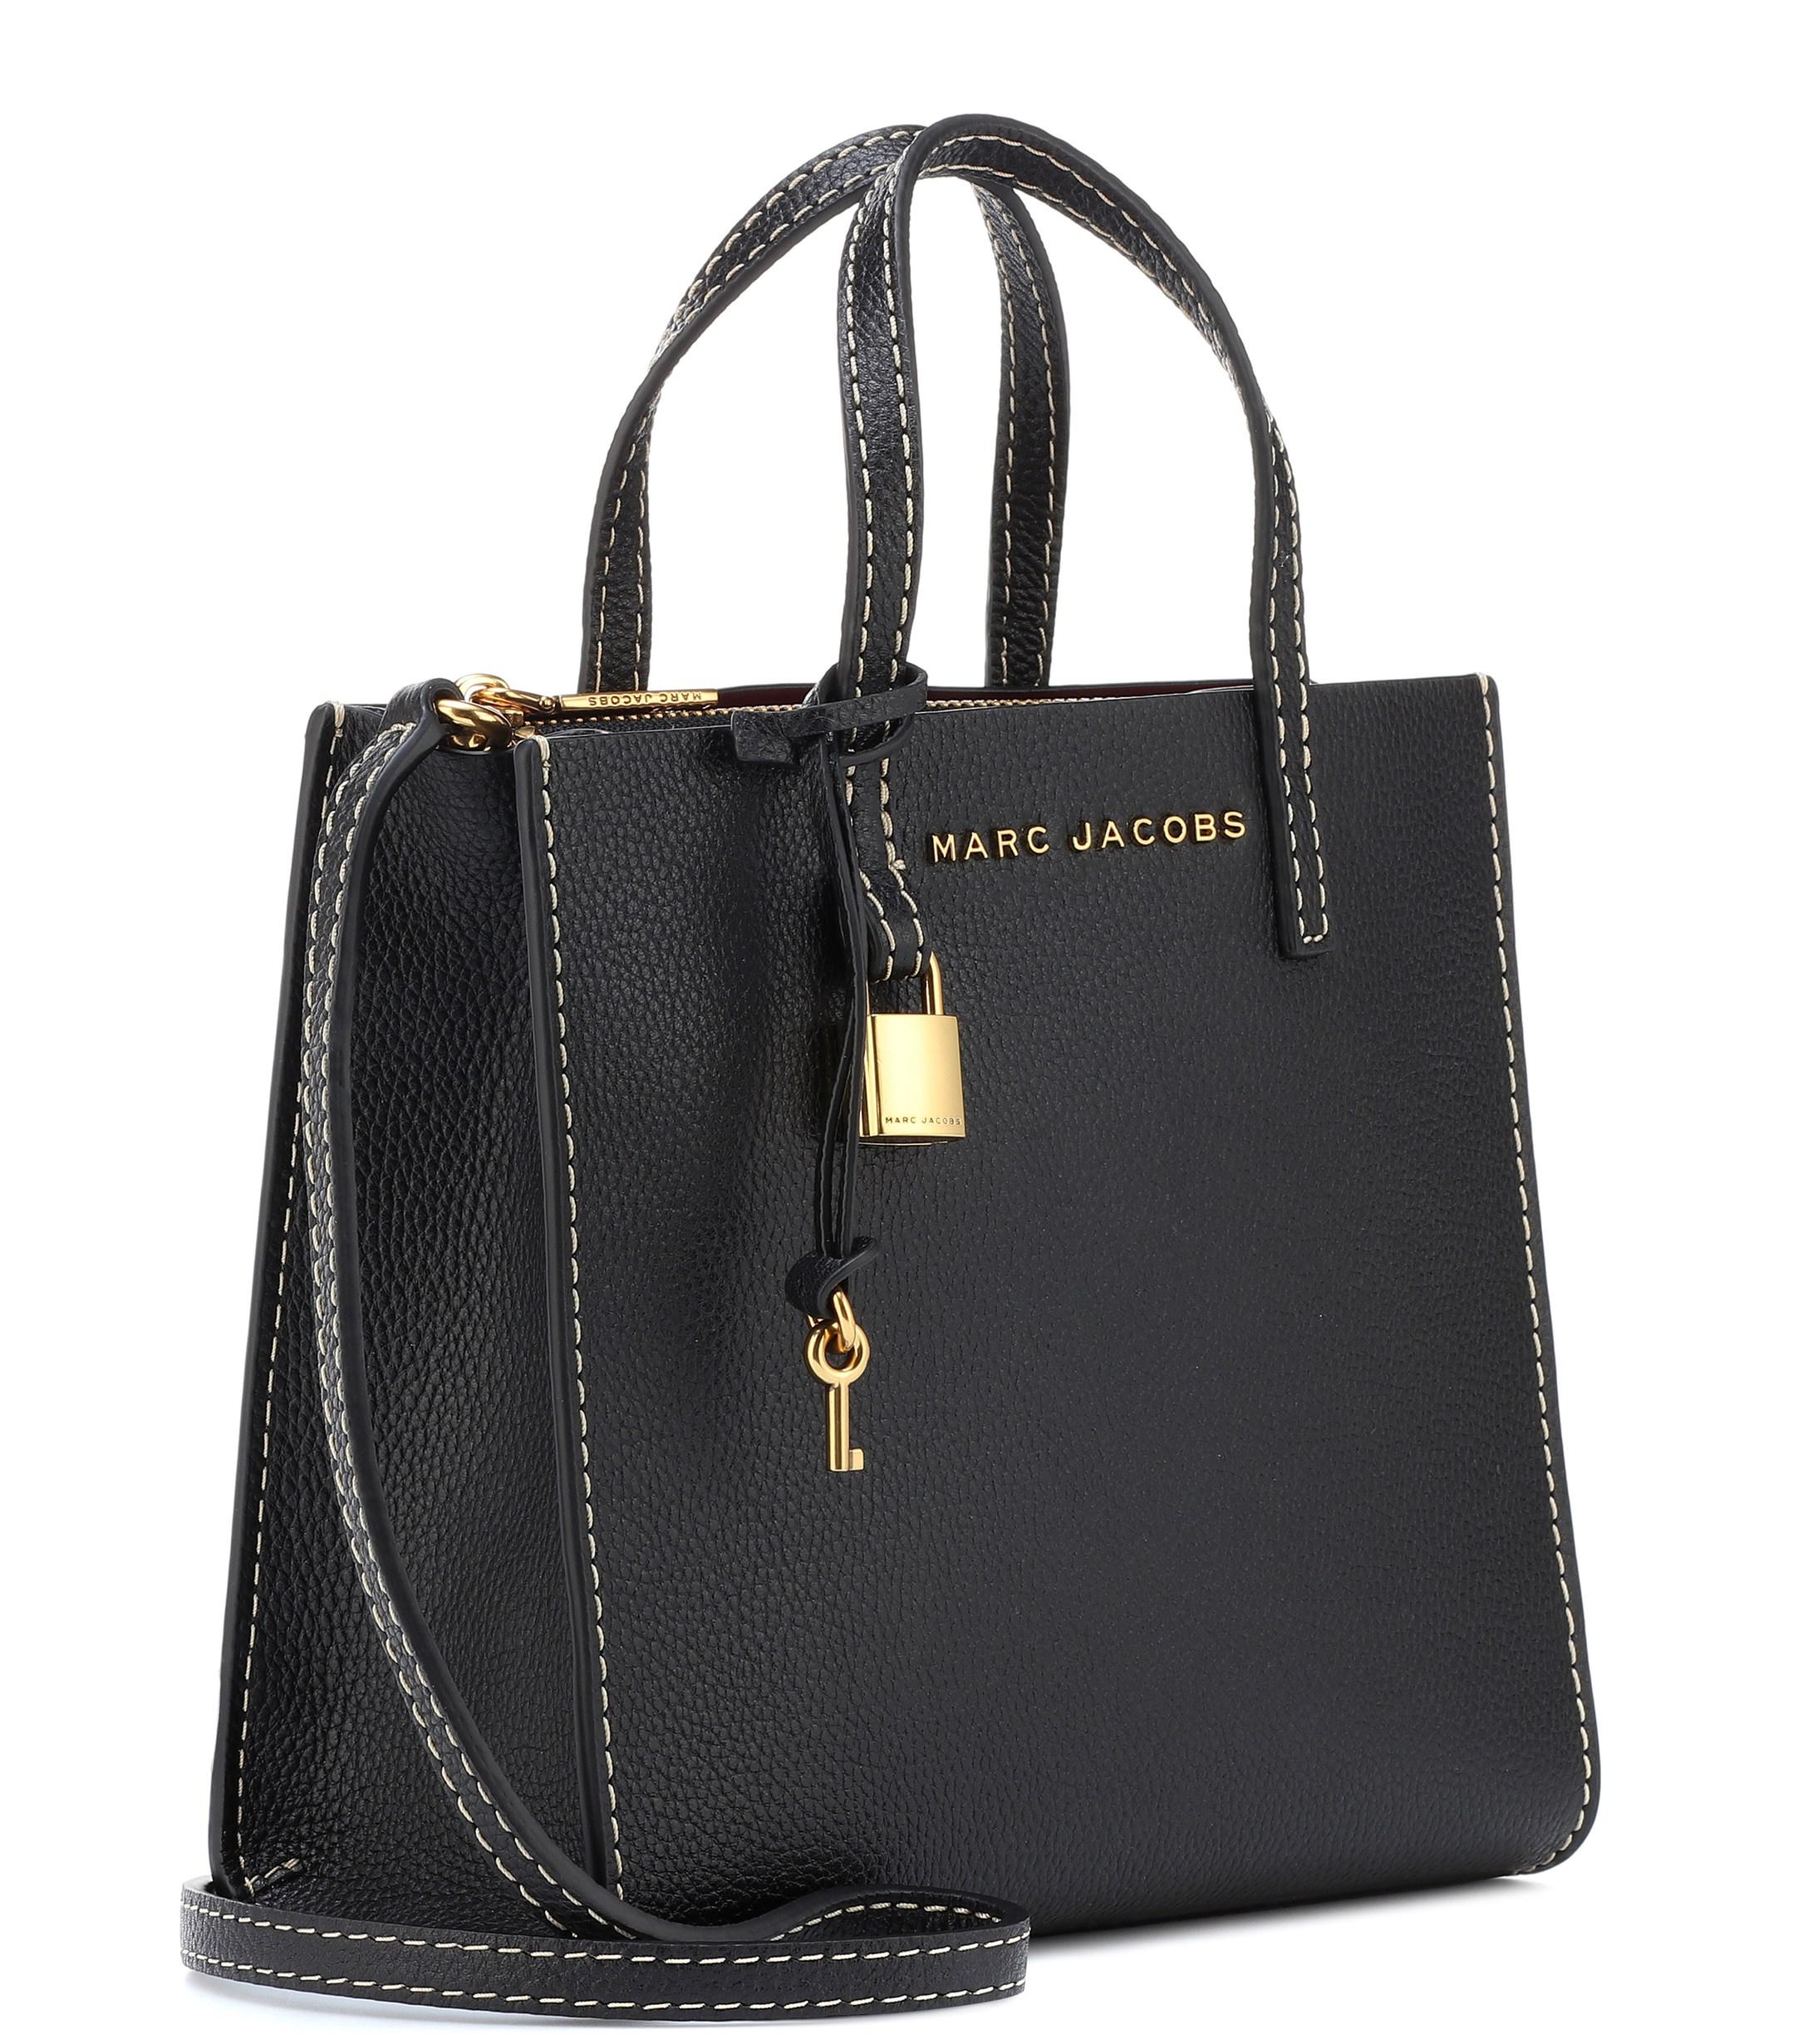 Marc Jacobs The Mini Grind Leather Tote in Black - Lyst